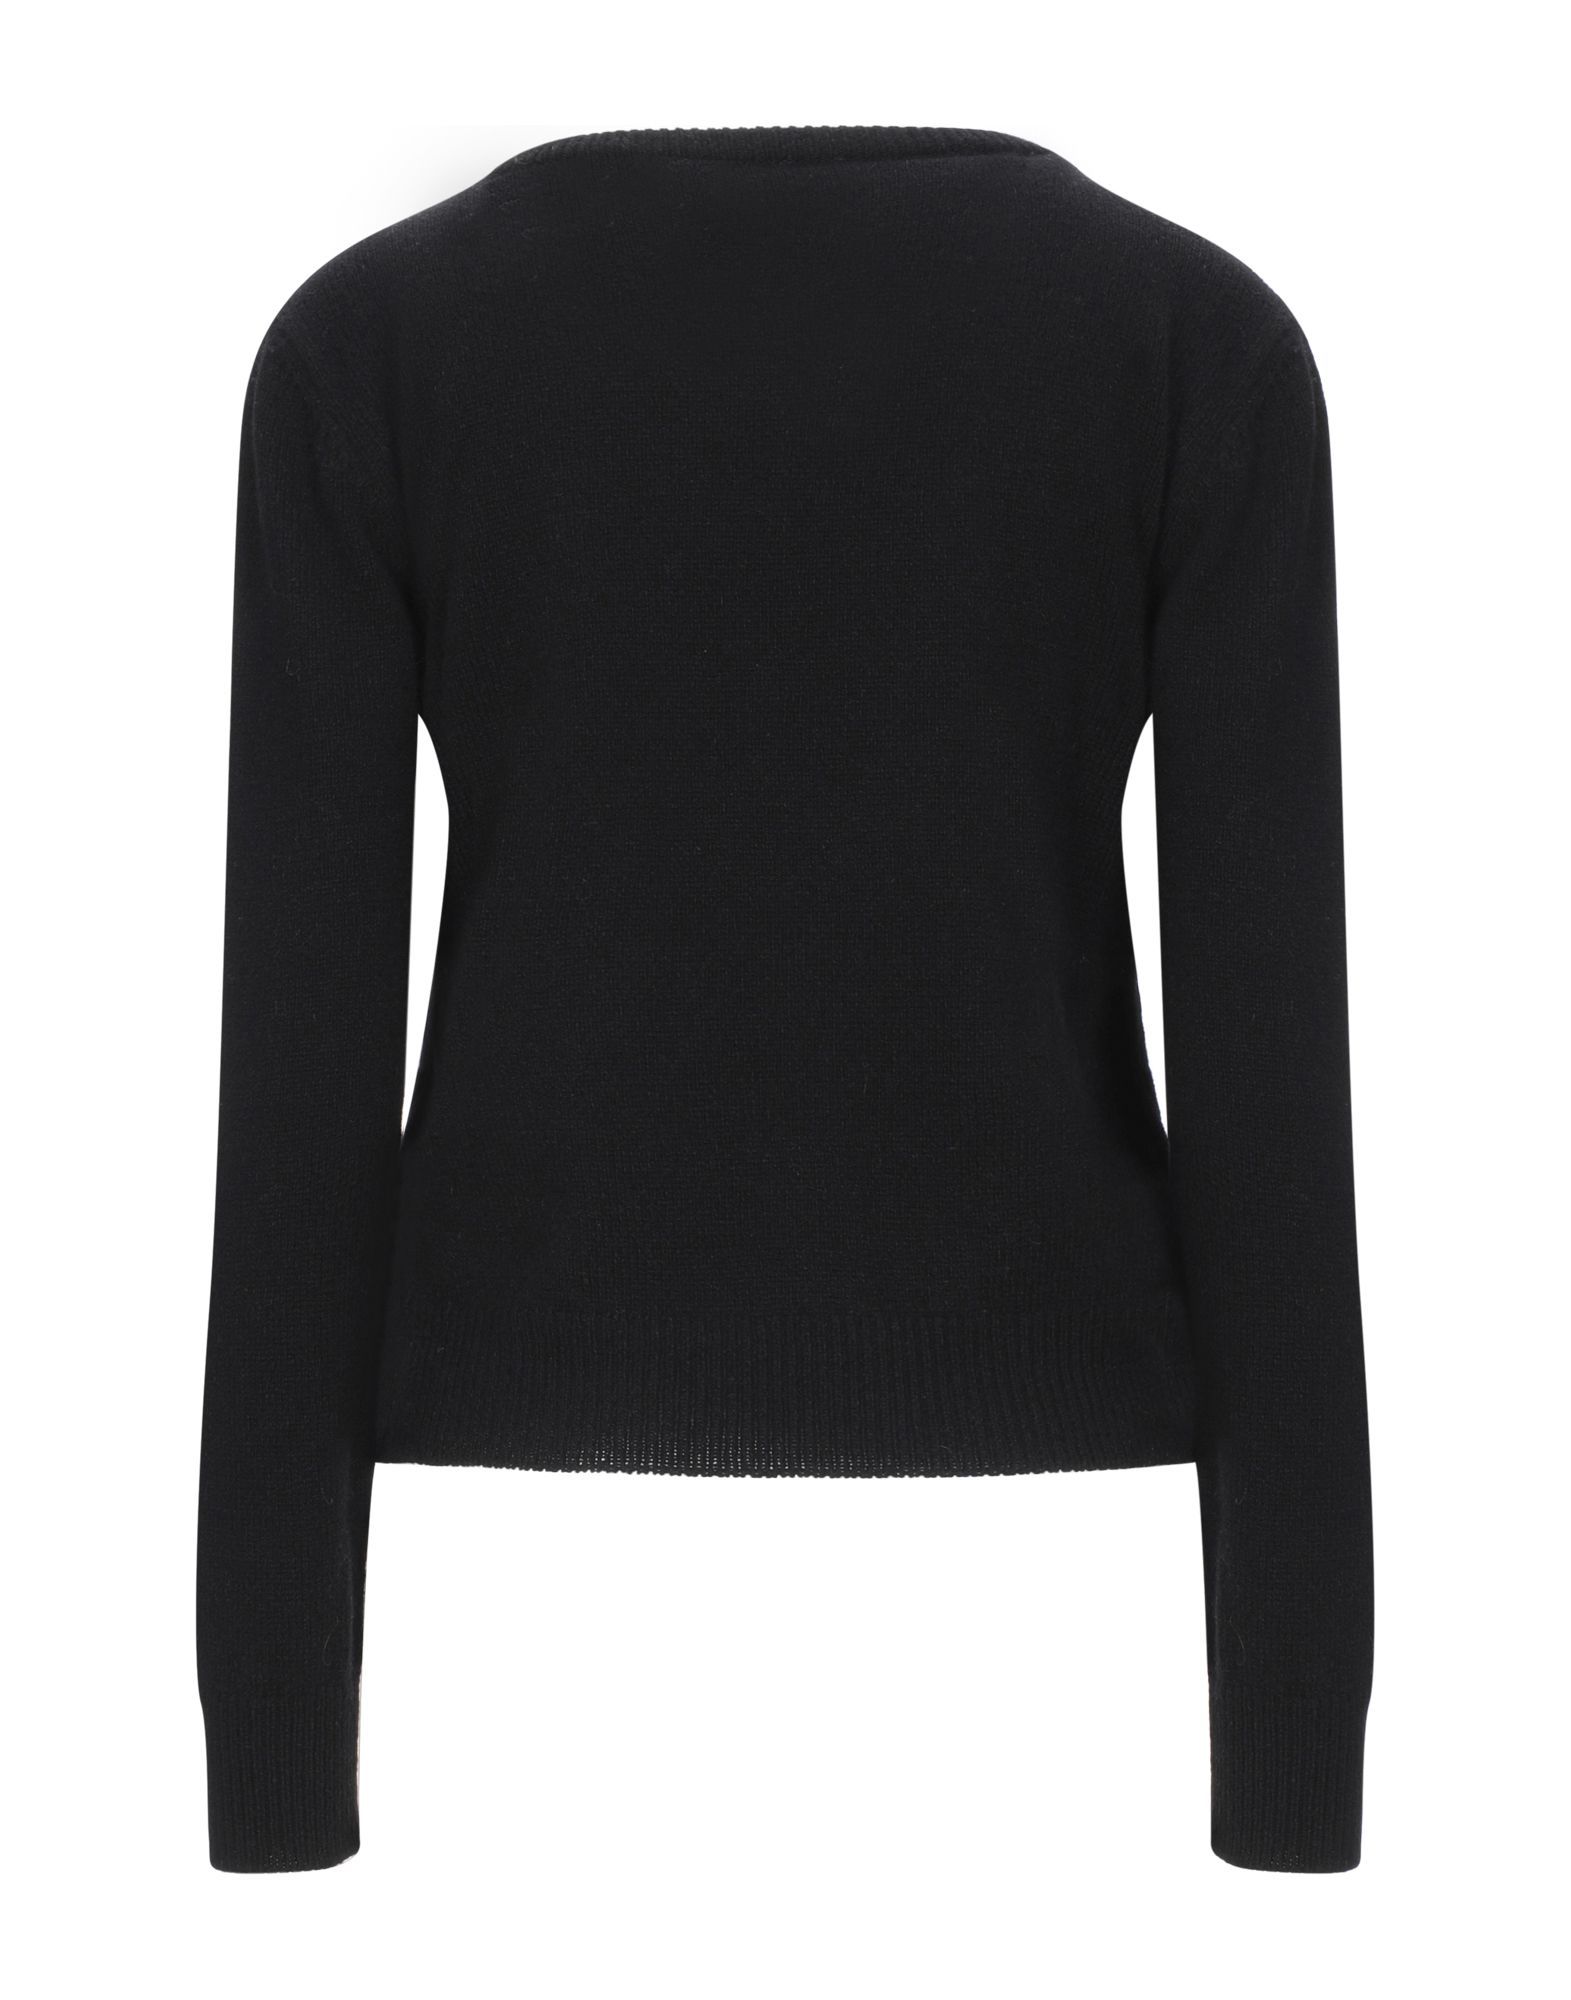 knitted, lamé, solid colour, round collar, lightweight knitted, long sleeves, no pockets, no appliqués